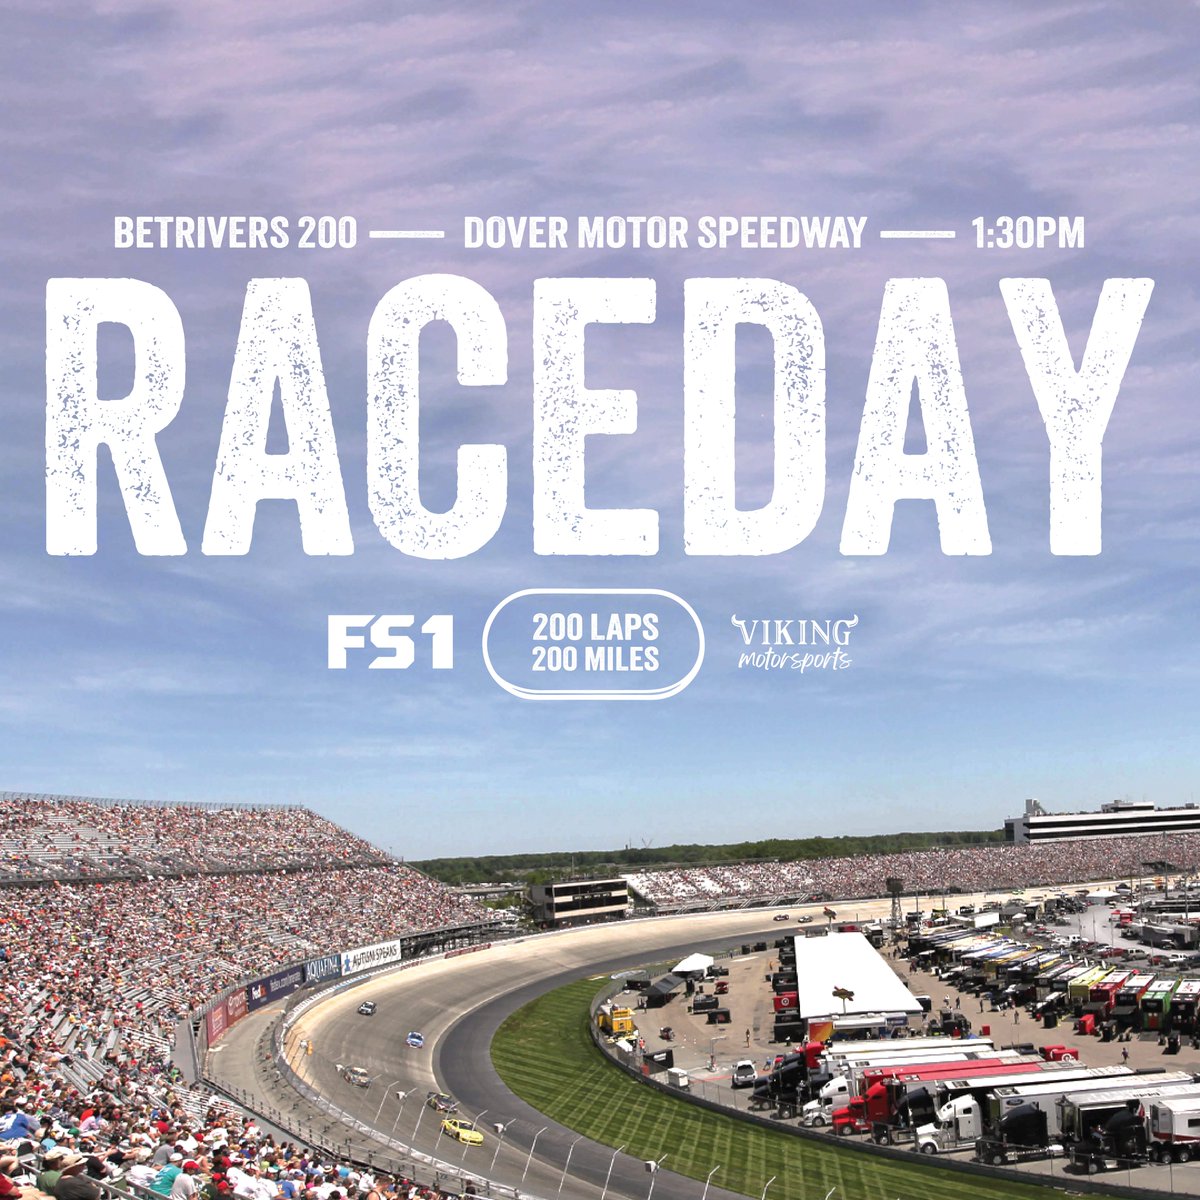 It's race day here in Dover! Tune in at 1:30 PM to watch us tackle the Monster Mile 🏁🪨 #Dover #BetRivers200 #MonsterMile #NASCAR #Xfinityseries #VikingMotorsports #fordperformance